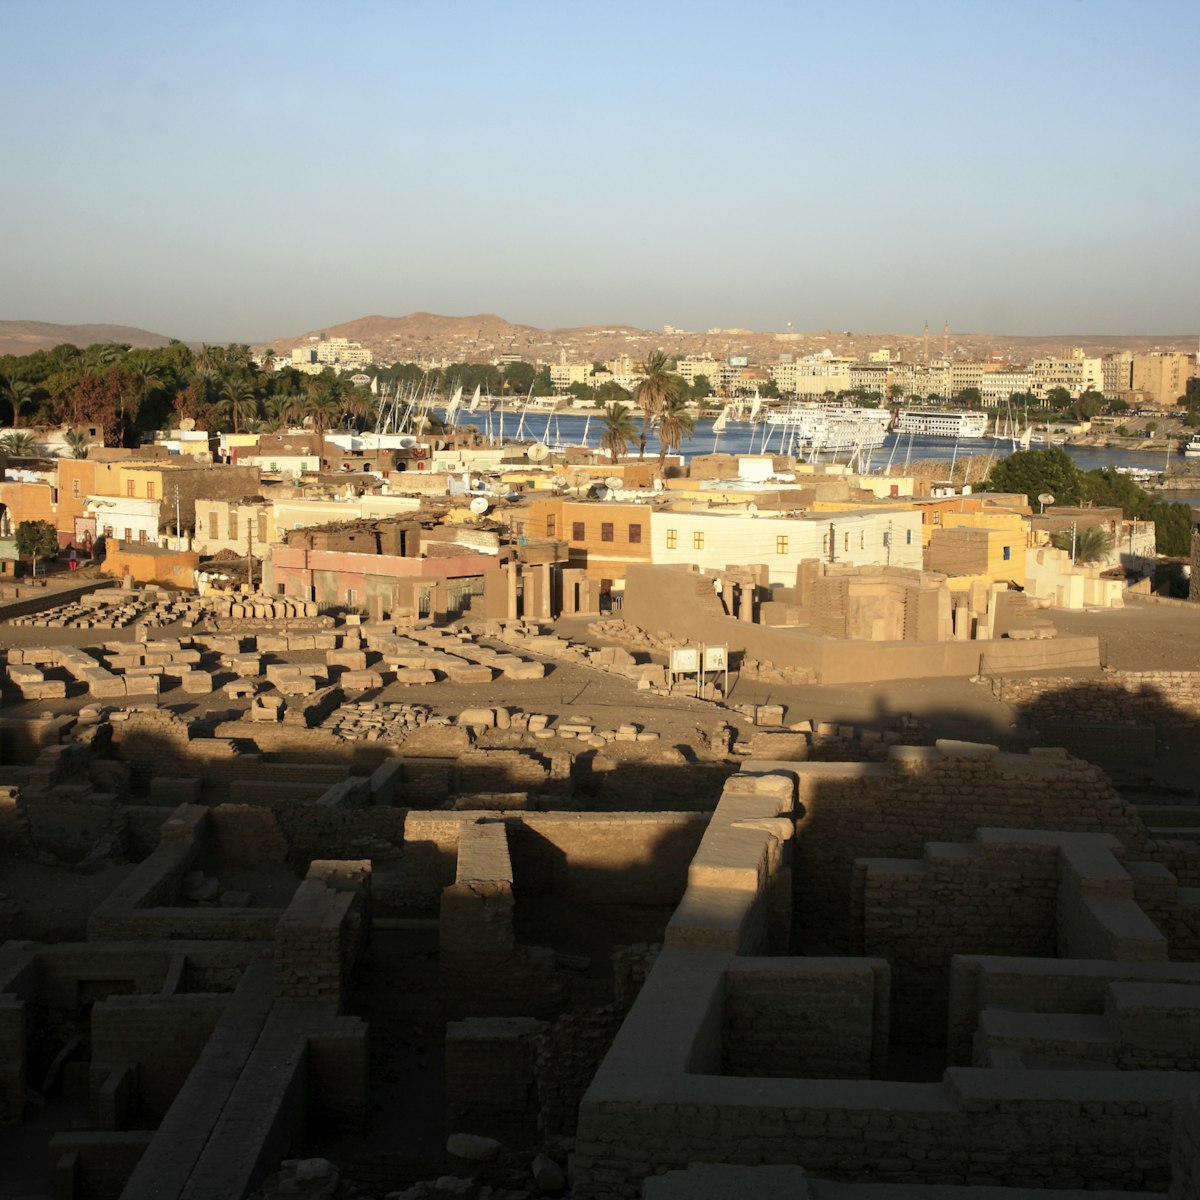 Ruins of Abu on Elephantine Island with Nile River in the background.